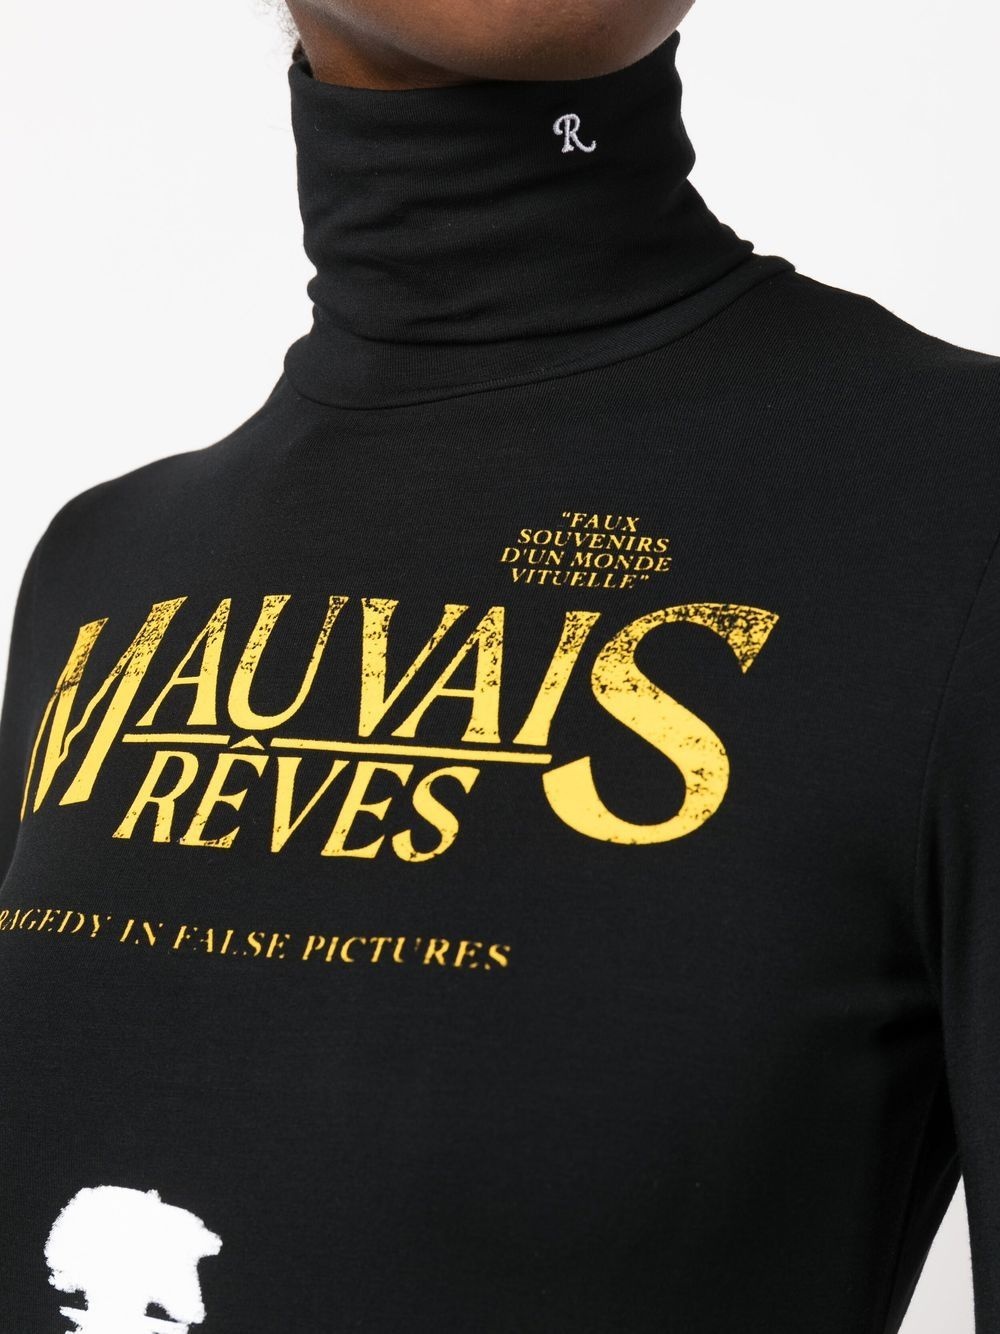 Mauvais Reves roll-neck jersey - 5